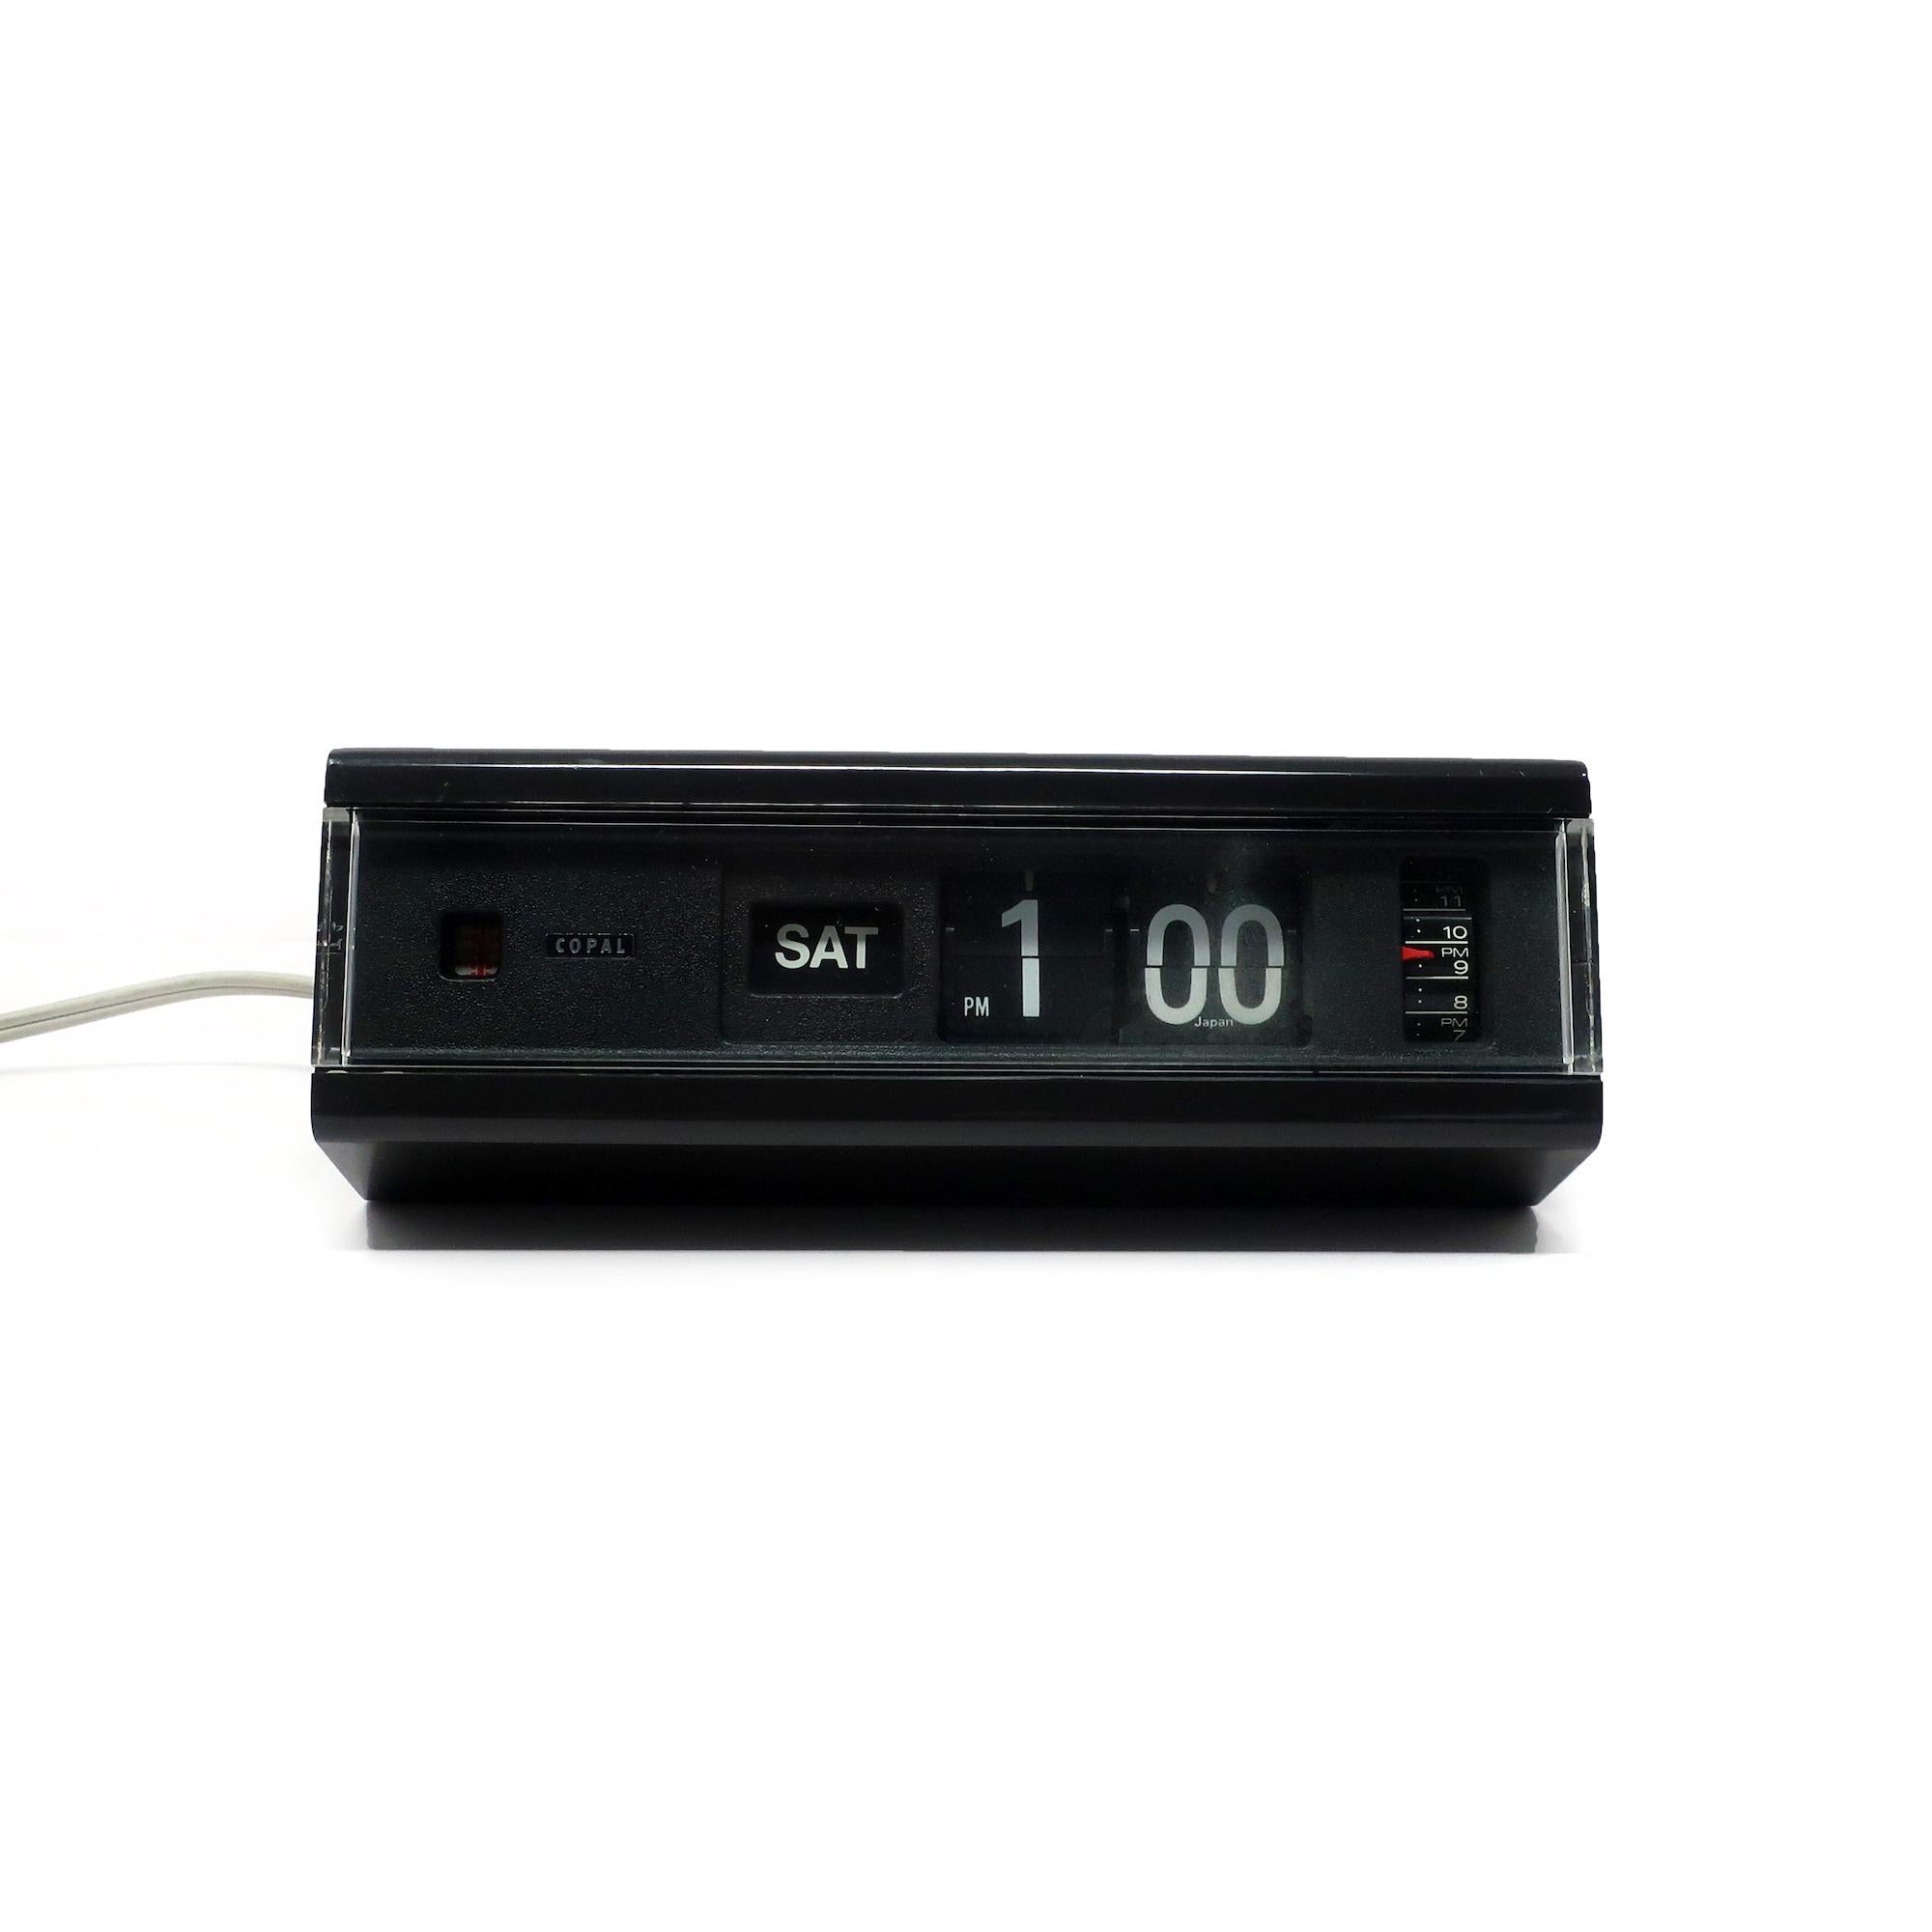 A beautiful mid-century modern Copal Model 229 flip clock with black plastic case, black face, white numbers and clear plastic front.  Minutes and hours flip as time passes, providing a satisfying quiet sound.  Looks fantastic and works great!  Has